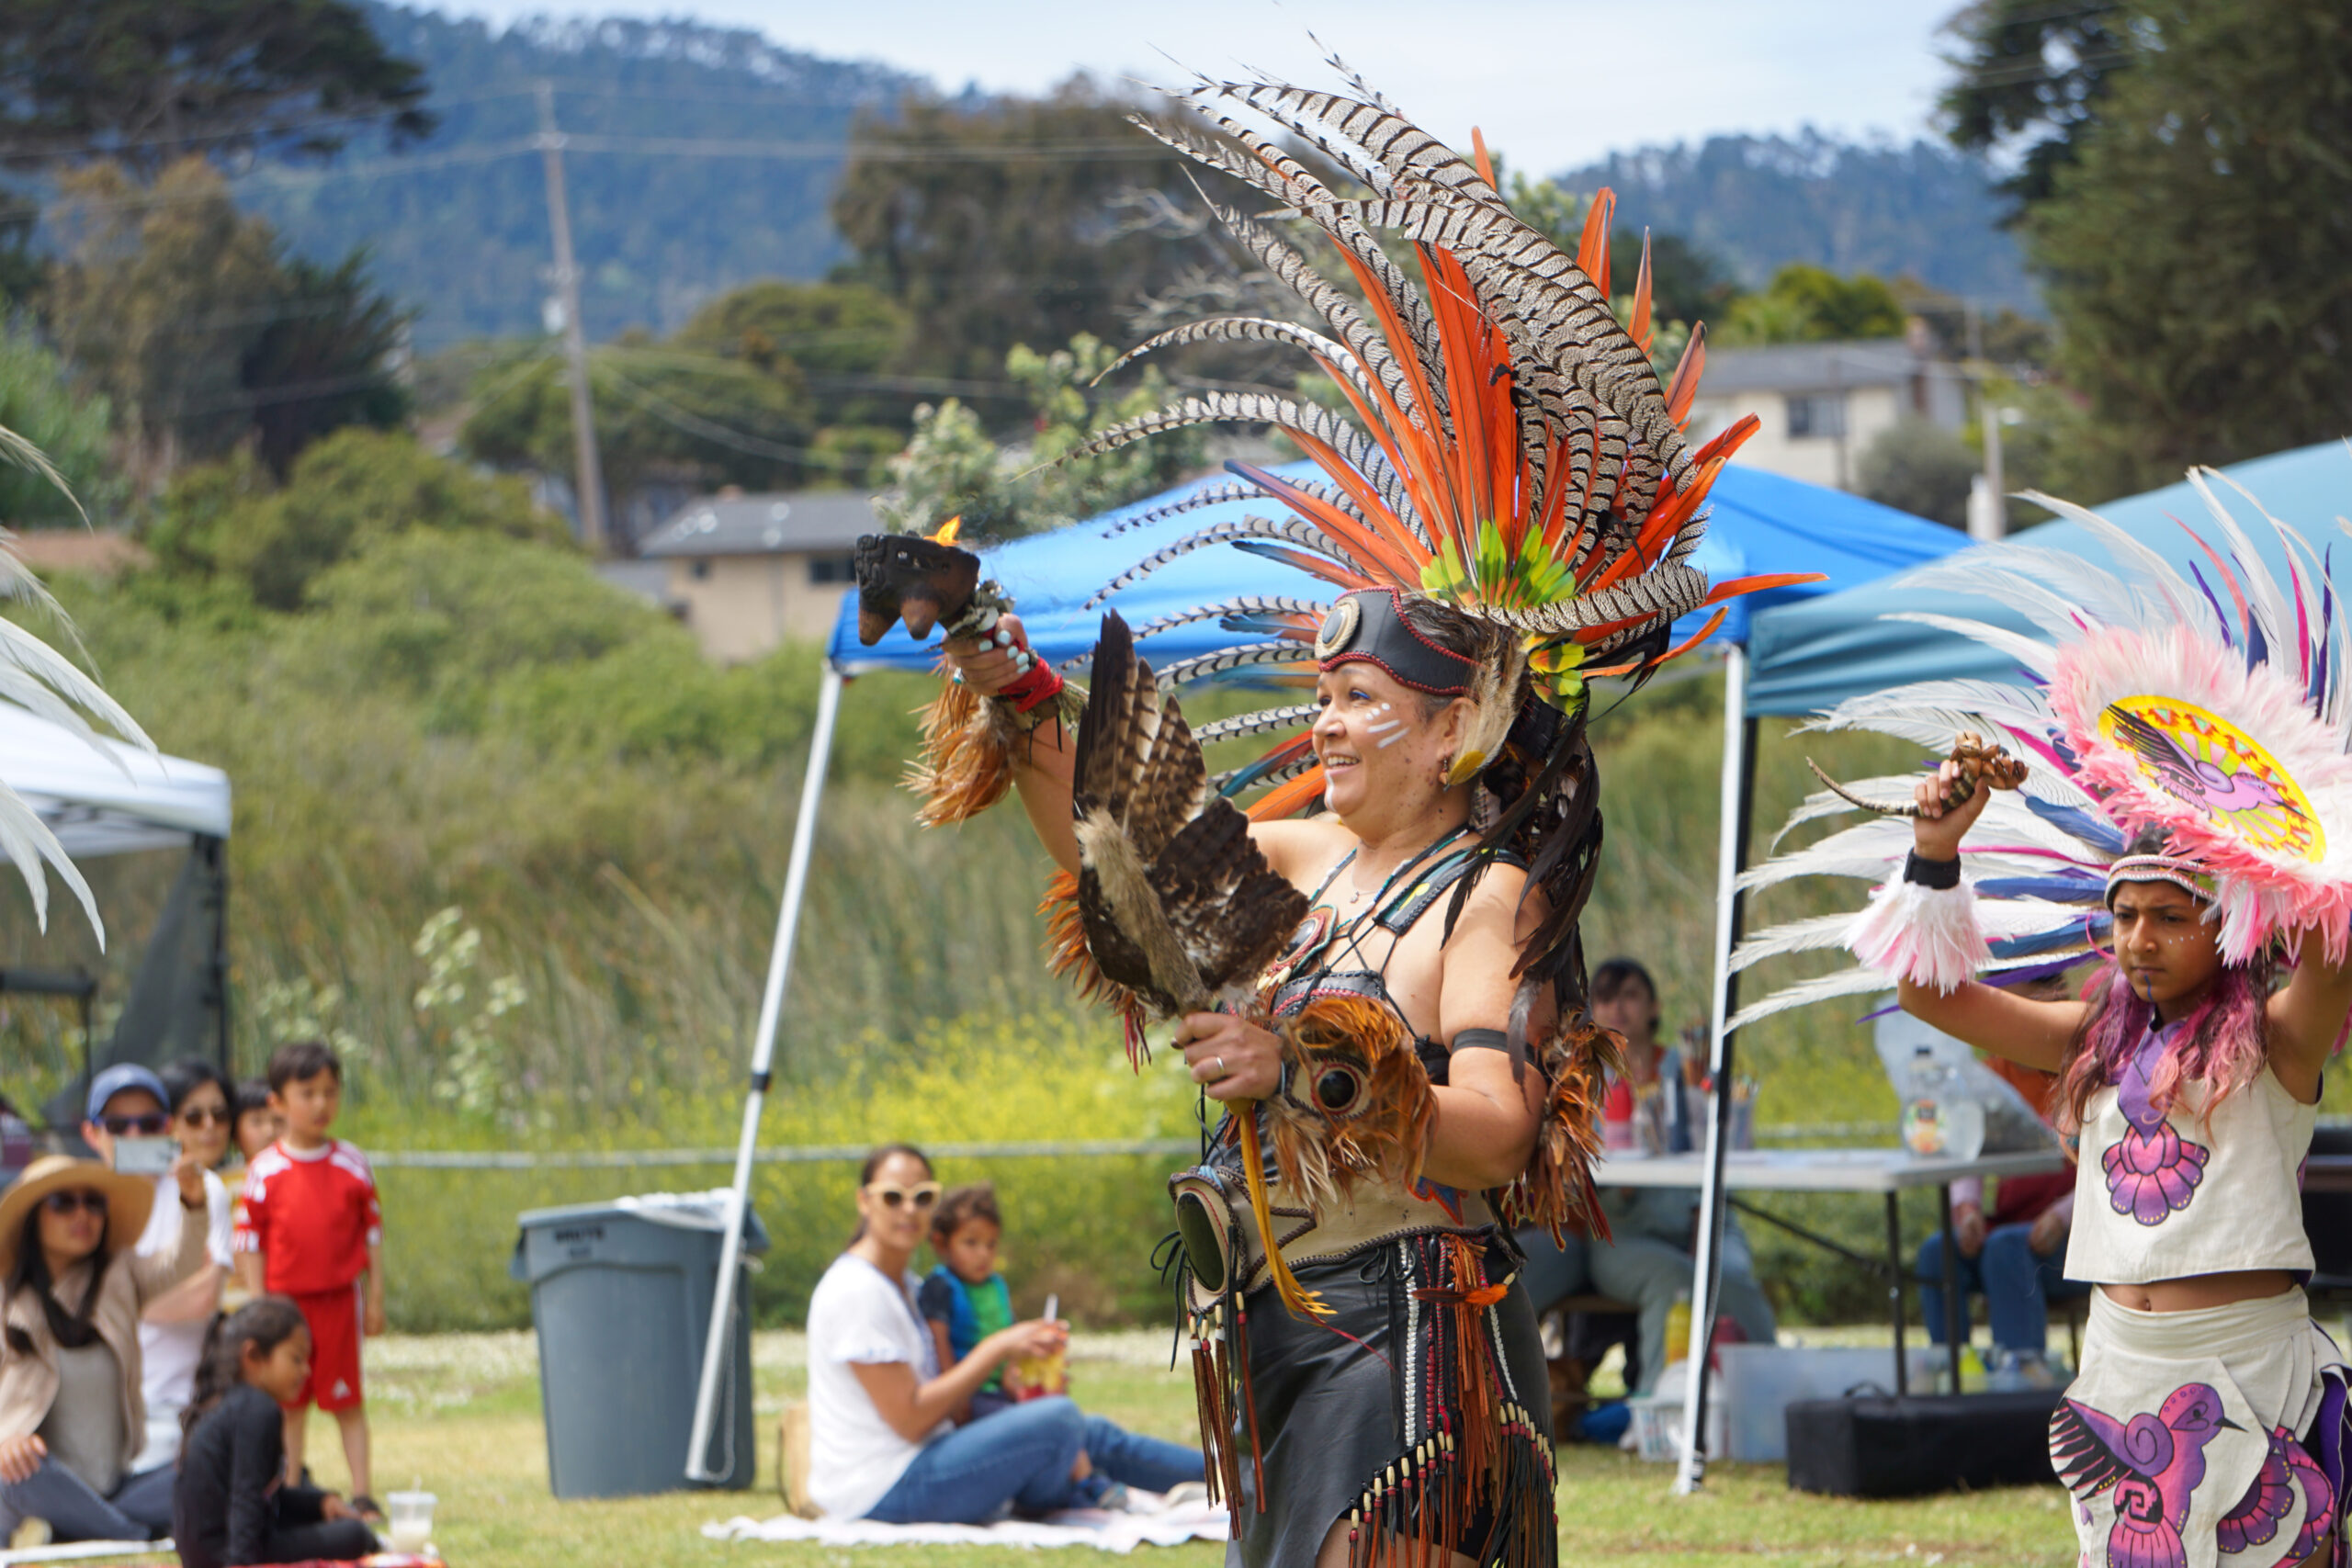 Aztec dance troupe Calpulli Tonalehqueh offers a blessing ceremony to honor the Ohlone/Esselen/Costanoan original inhabitants of the Monterey Peninsula during the 6th Annual Palenke Arts Festival at Laguna Grande Park in Seaside on June 5, 2022.